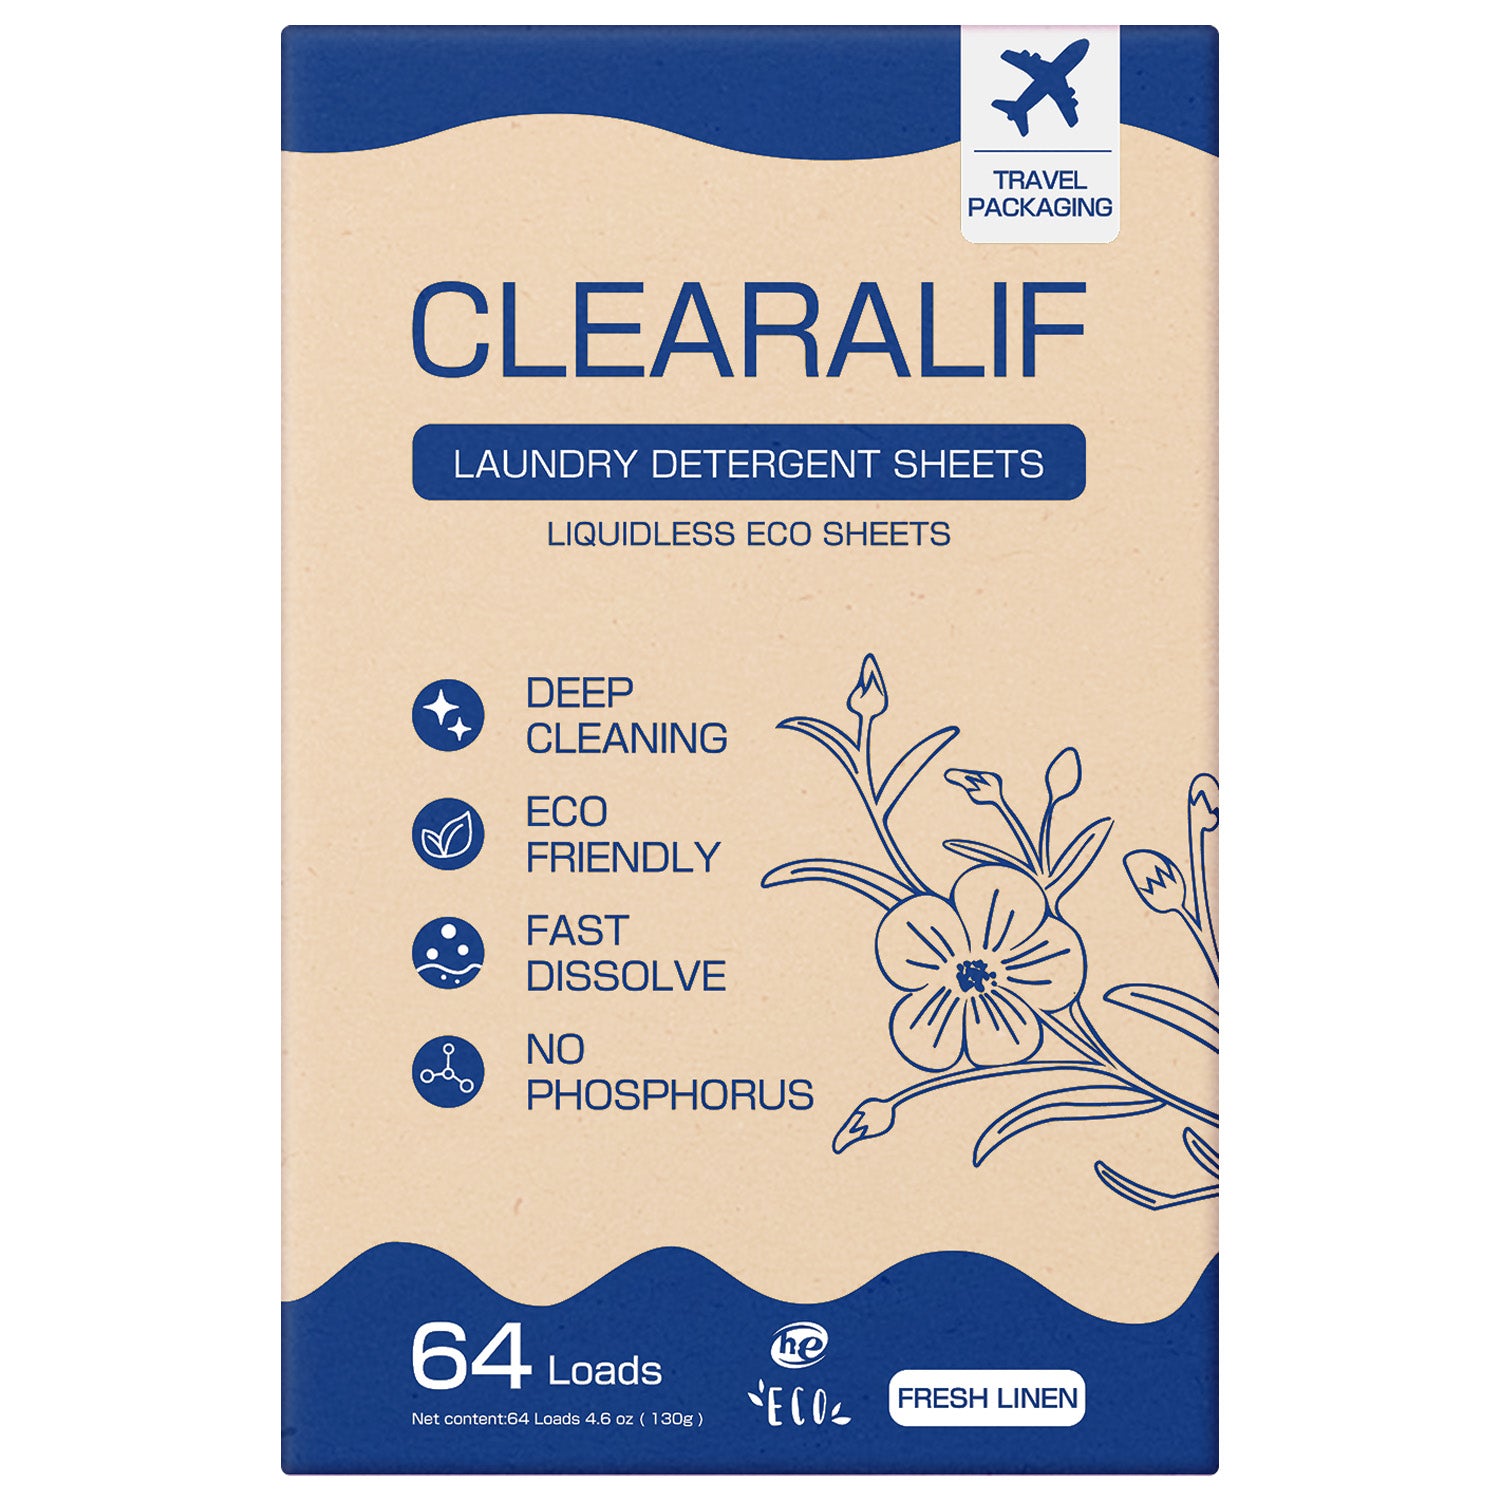 CLEARALIF Eco Friendly & Hypoallergenic Laundry Detergent Sheets 64 Loads, Fresh Liene